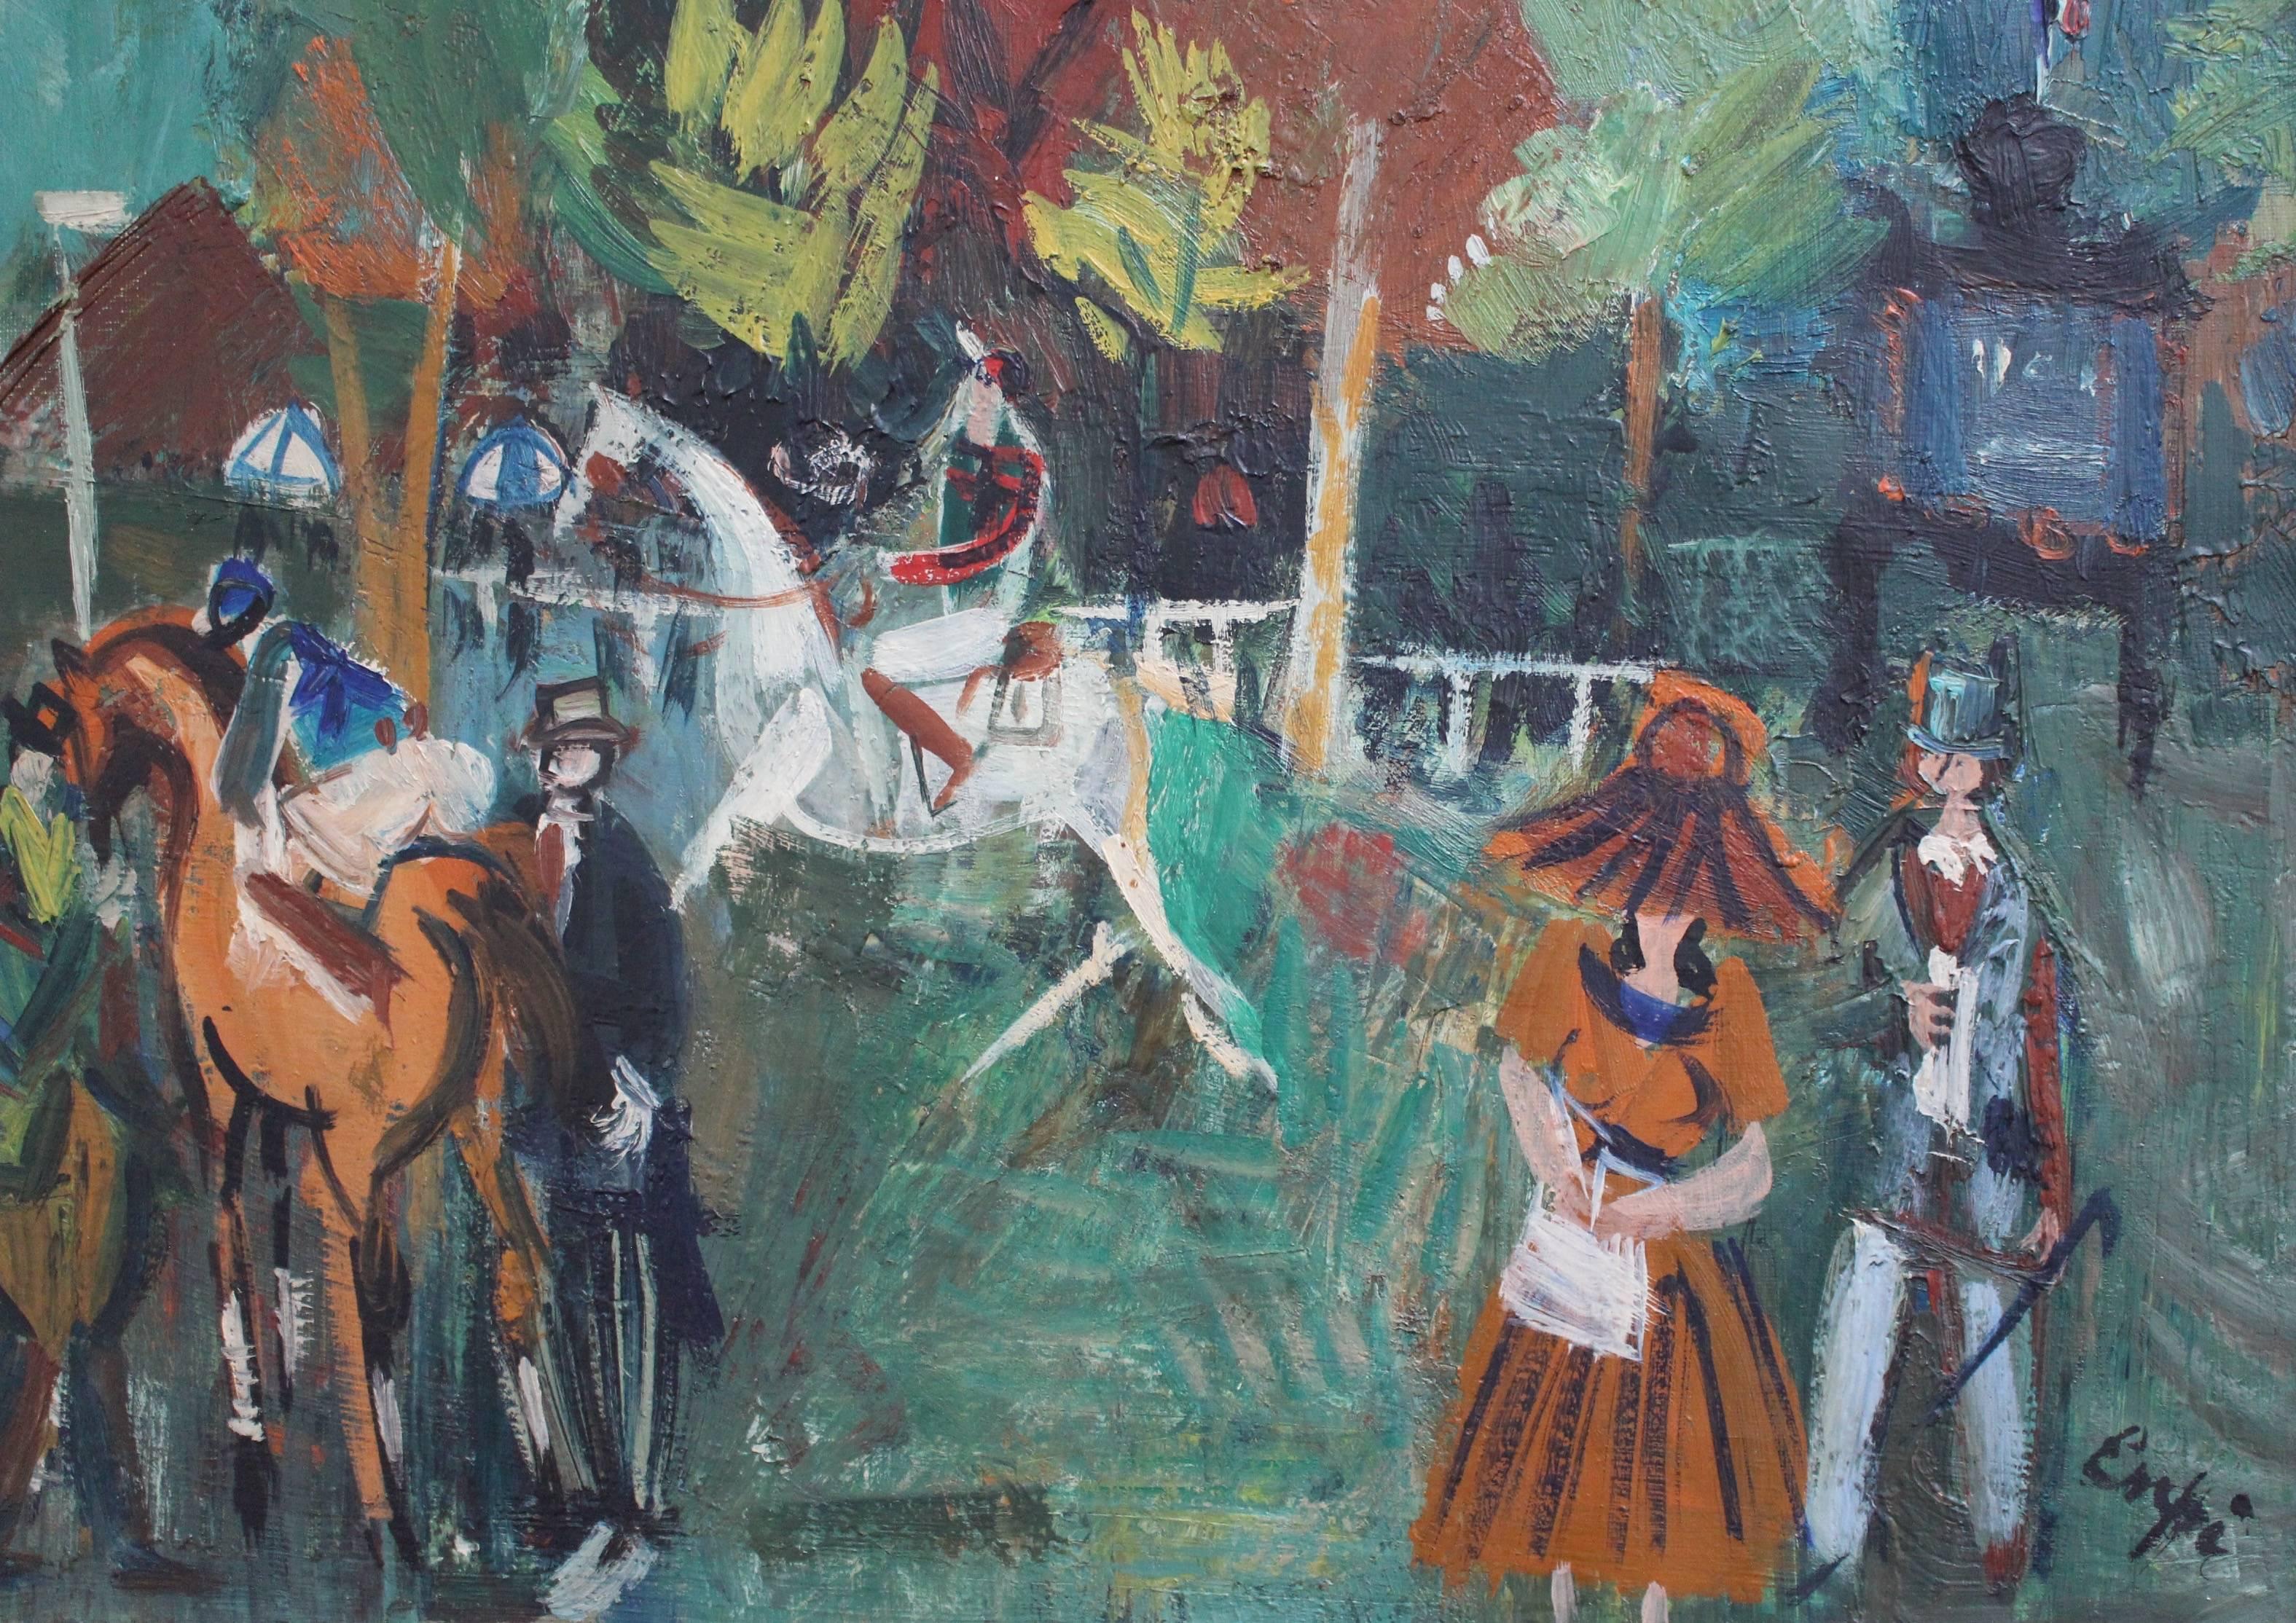 'Longchamp Racecourse Paris', oil on canvas (circa 1960s), by Maurice Empi (1933 -      ). A recurring theme in Empi's work comes from his love of the horse races - the colours, the crowds and of course the horses all figure in this vibrant work. In